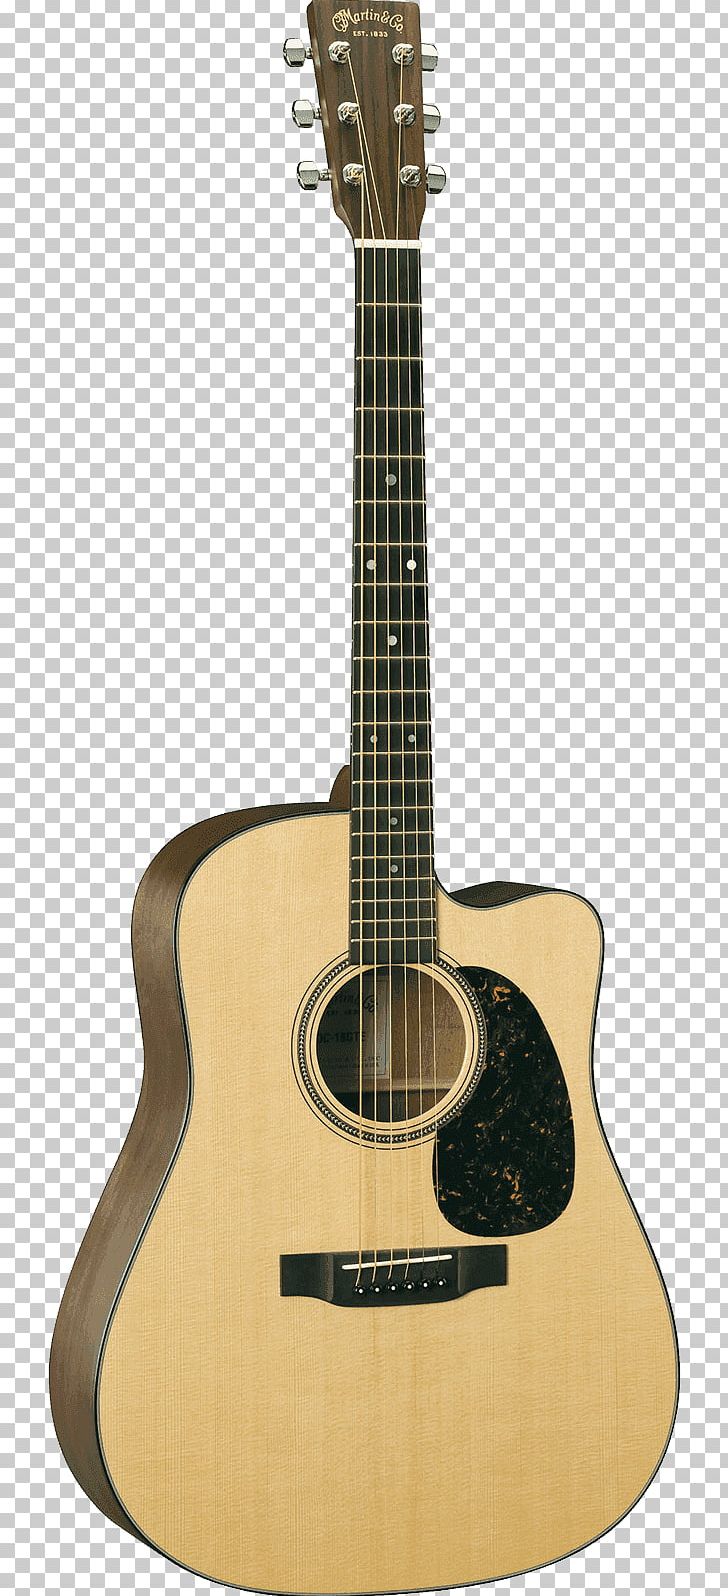 Acoustic-electric Guitar Steel-string Acoustic Guitar Yamaha Corporation PNG, Clipart, Acoustic Electric Guitar, Cuatro, Cutaway, Guitar Accessory, Slide Guitar Free PNG Download